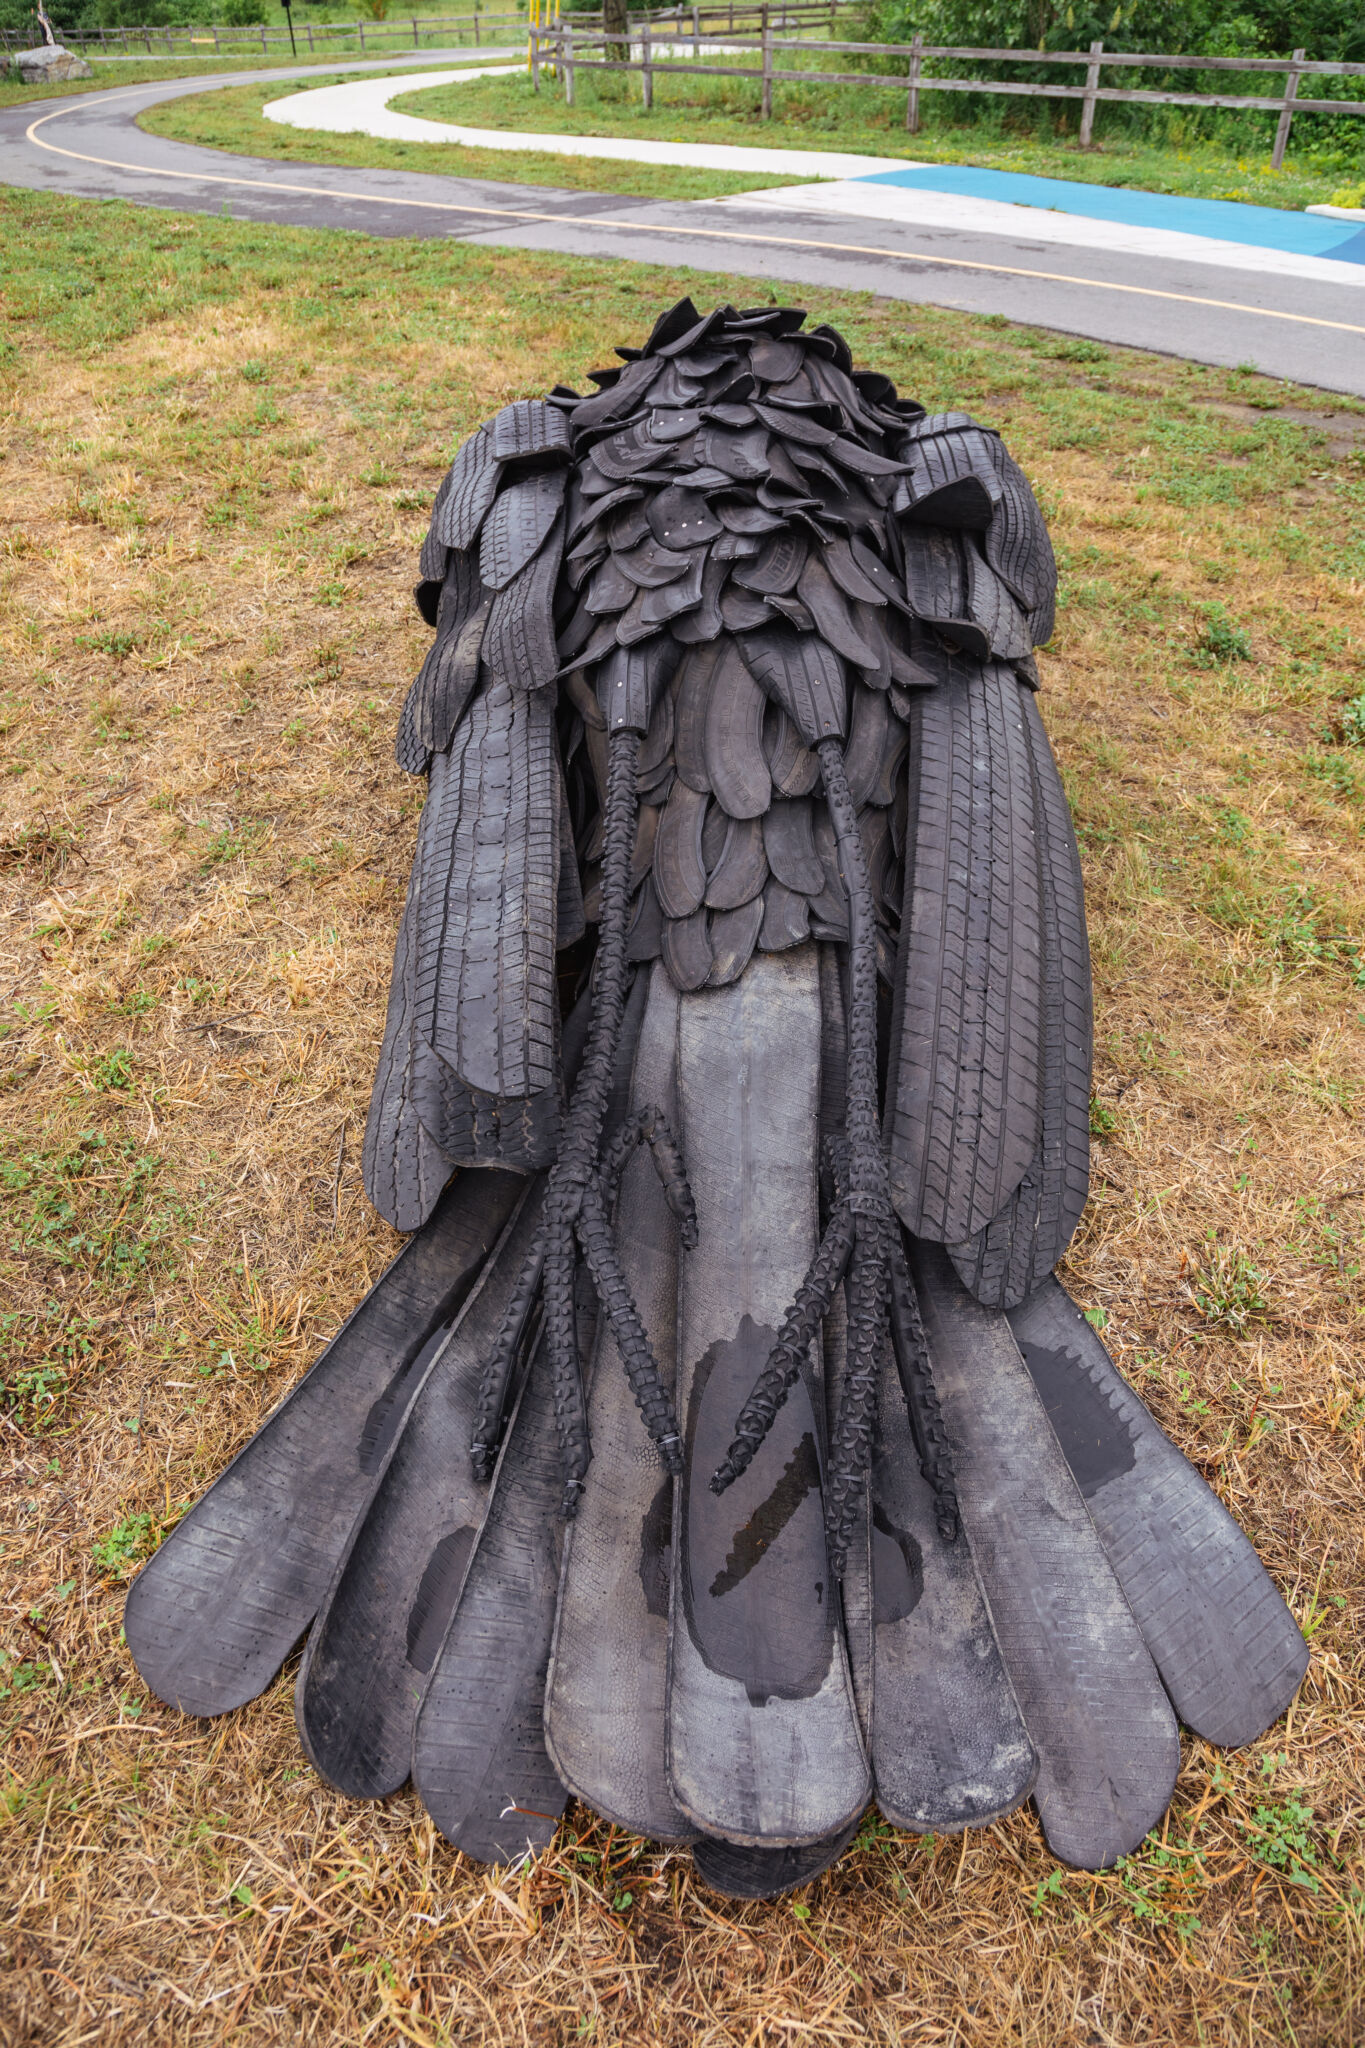 Close-up of the work, featuring the crow’s body, made of recycled tires.